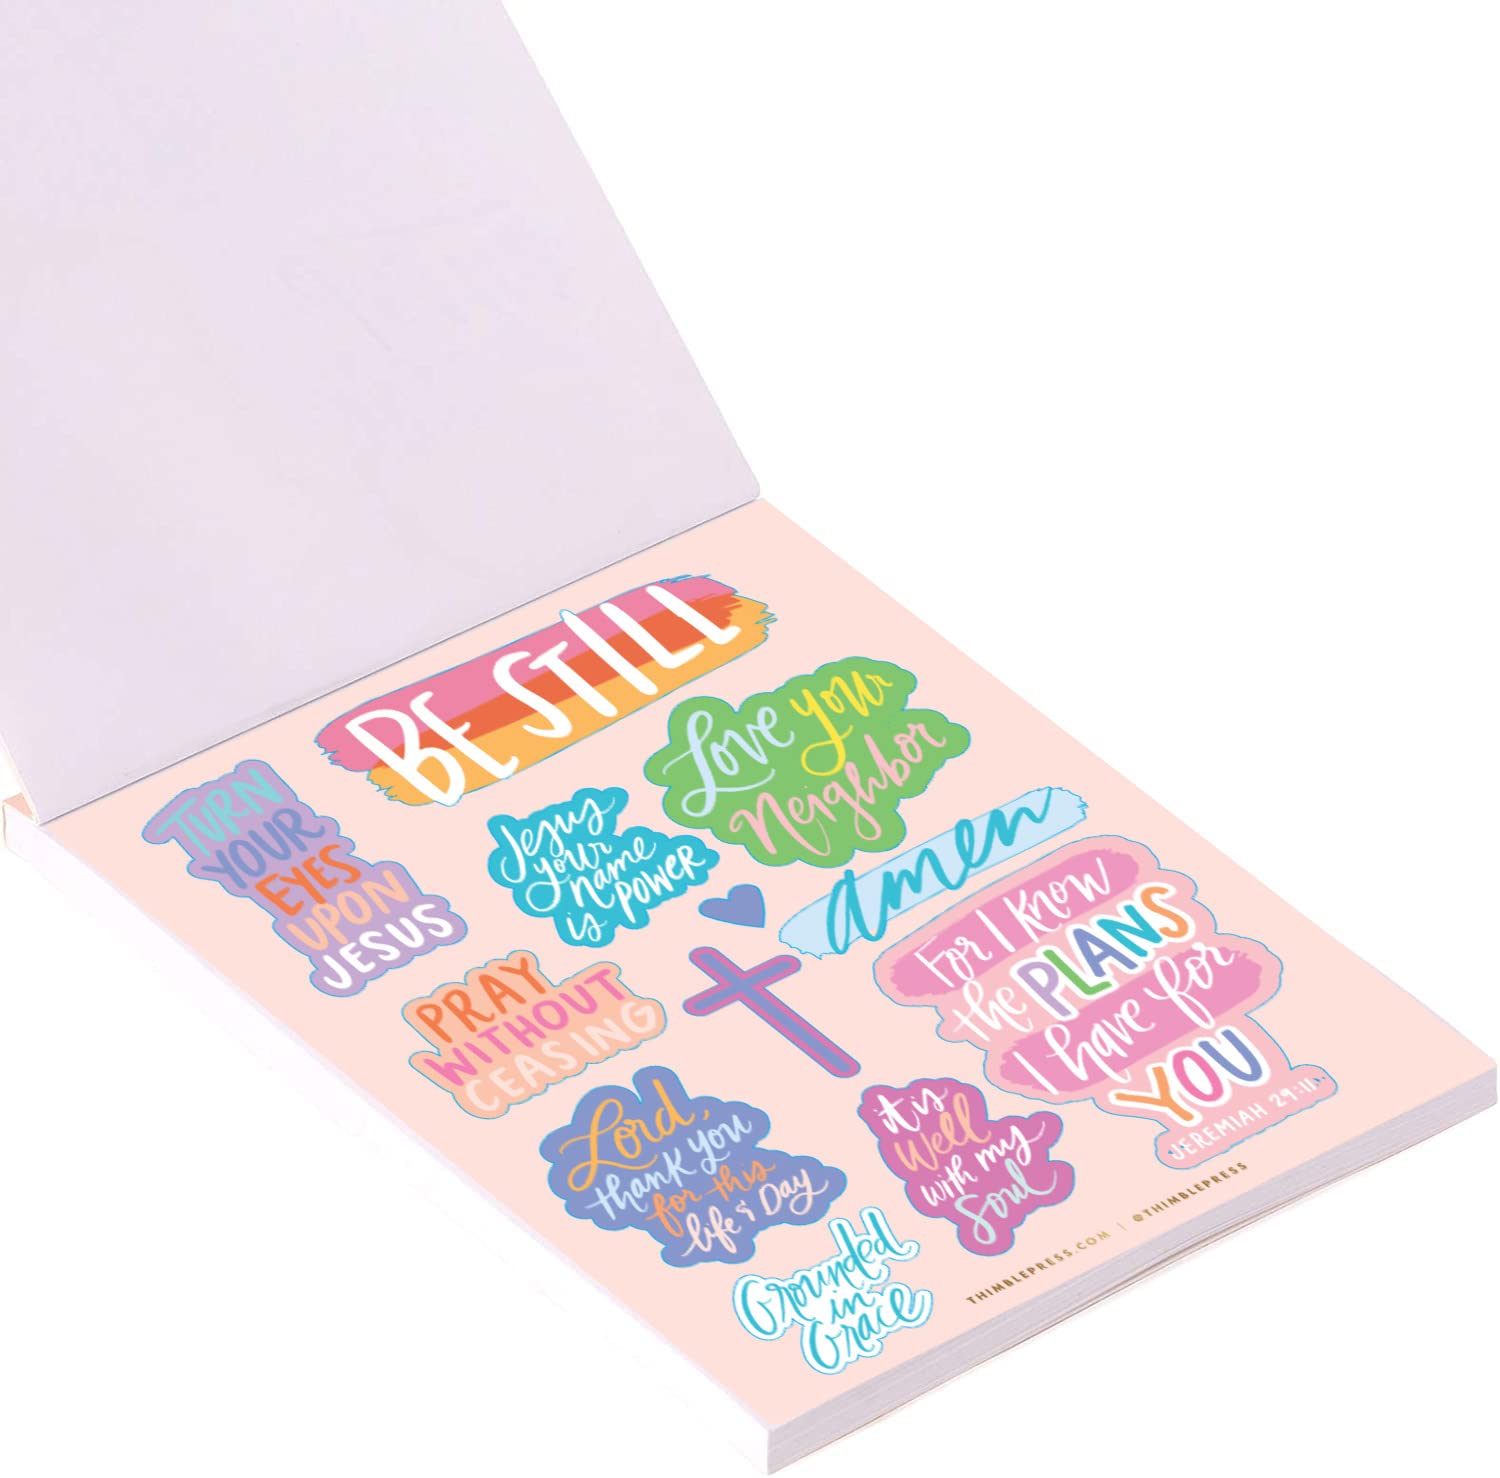 Inspirational Stickers from Eccolo Thimblepress Bible Blessings Book